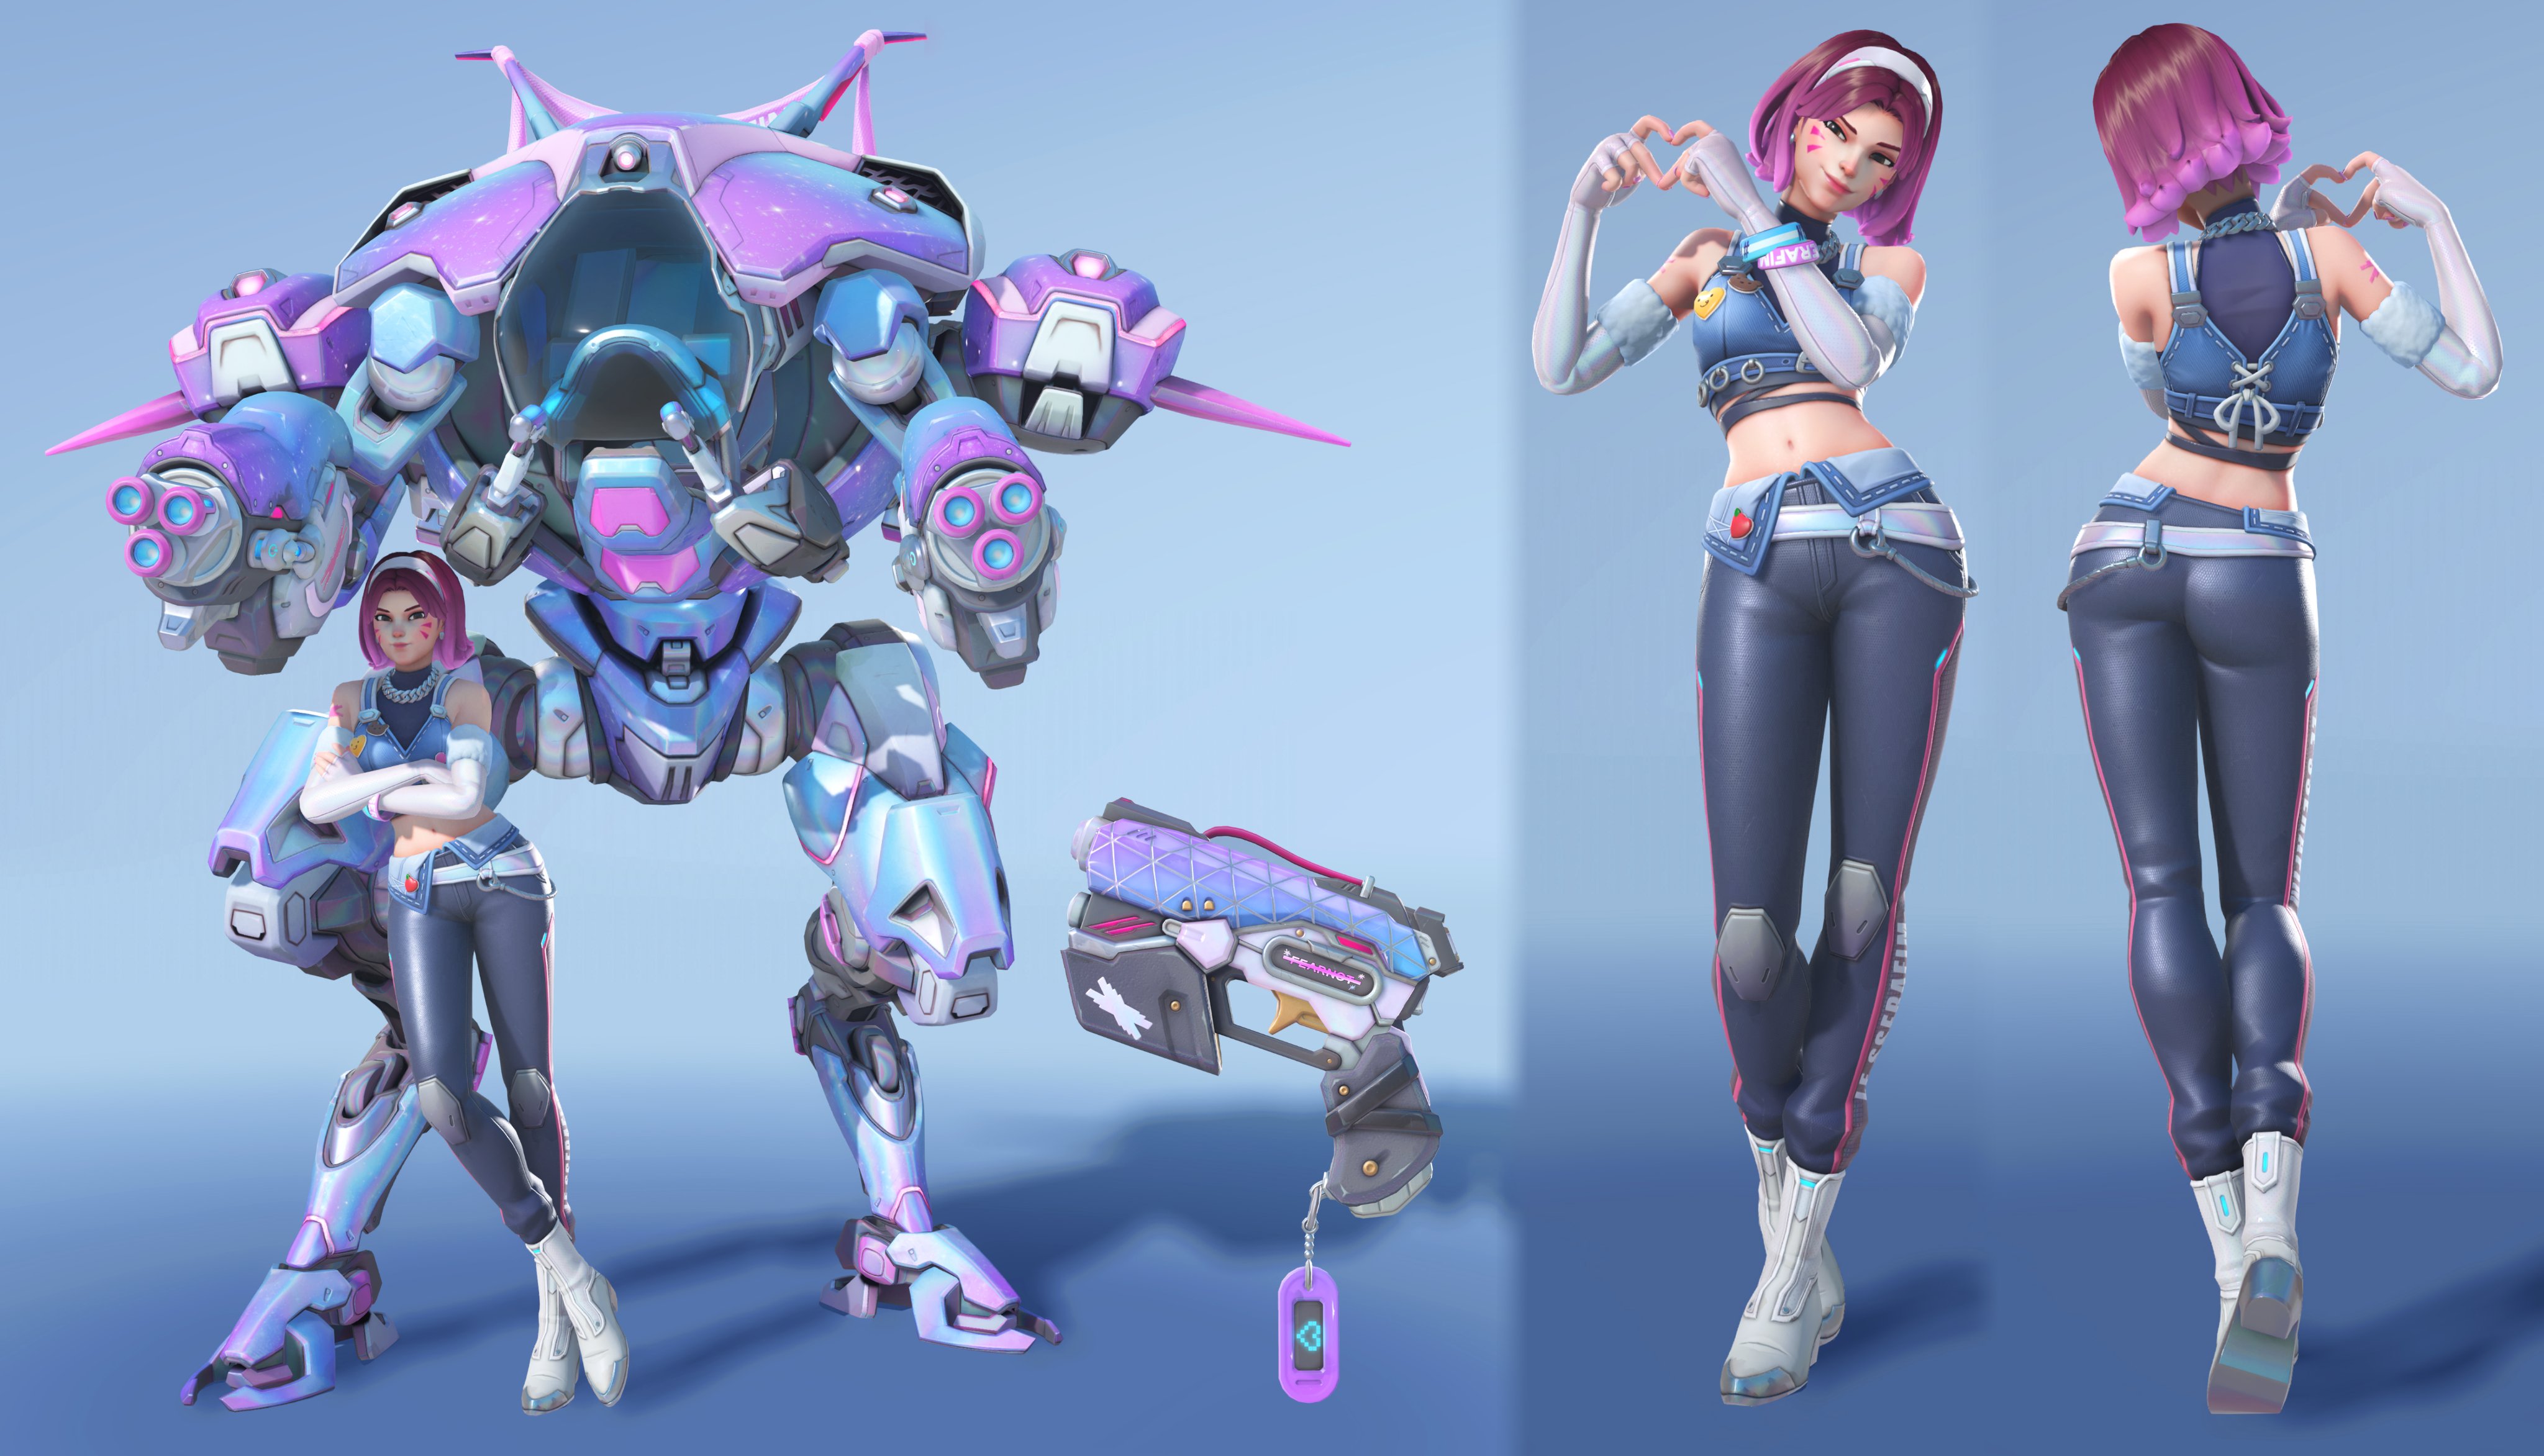 Naeri X 나에리 on X: Overwatch 2 League New Tracer Free Skins